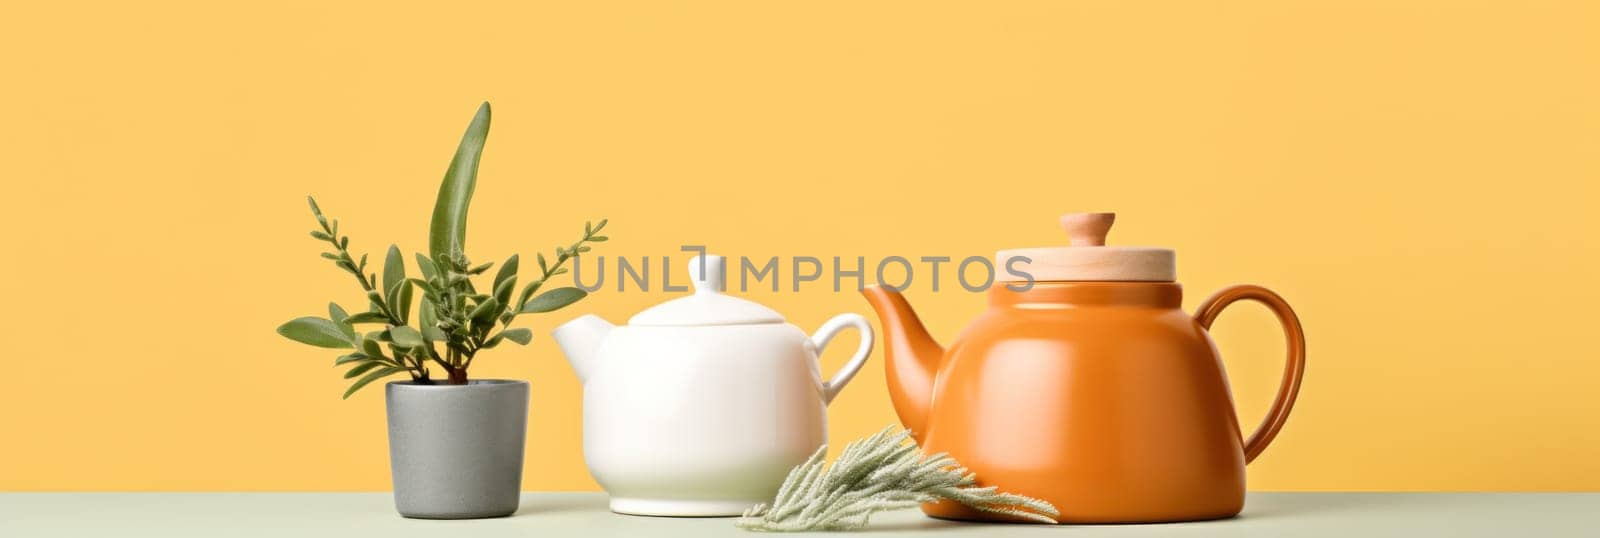 A table with a potted plant and a teapot on it